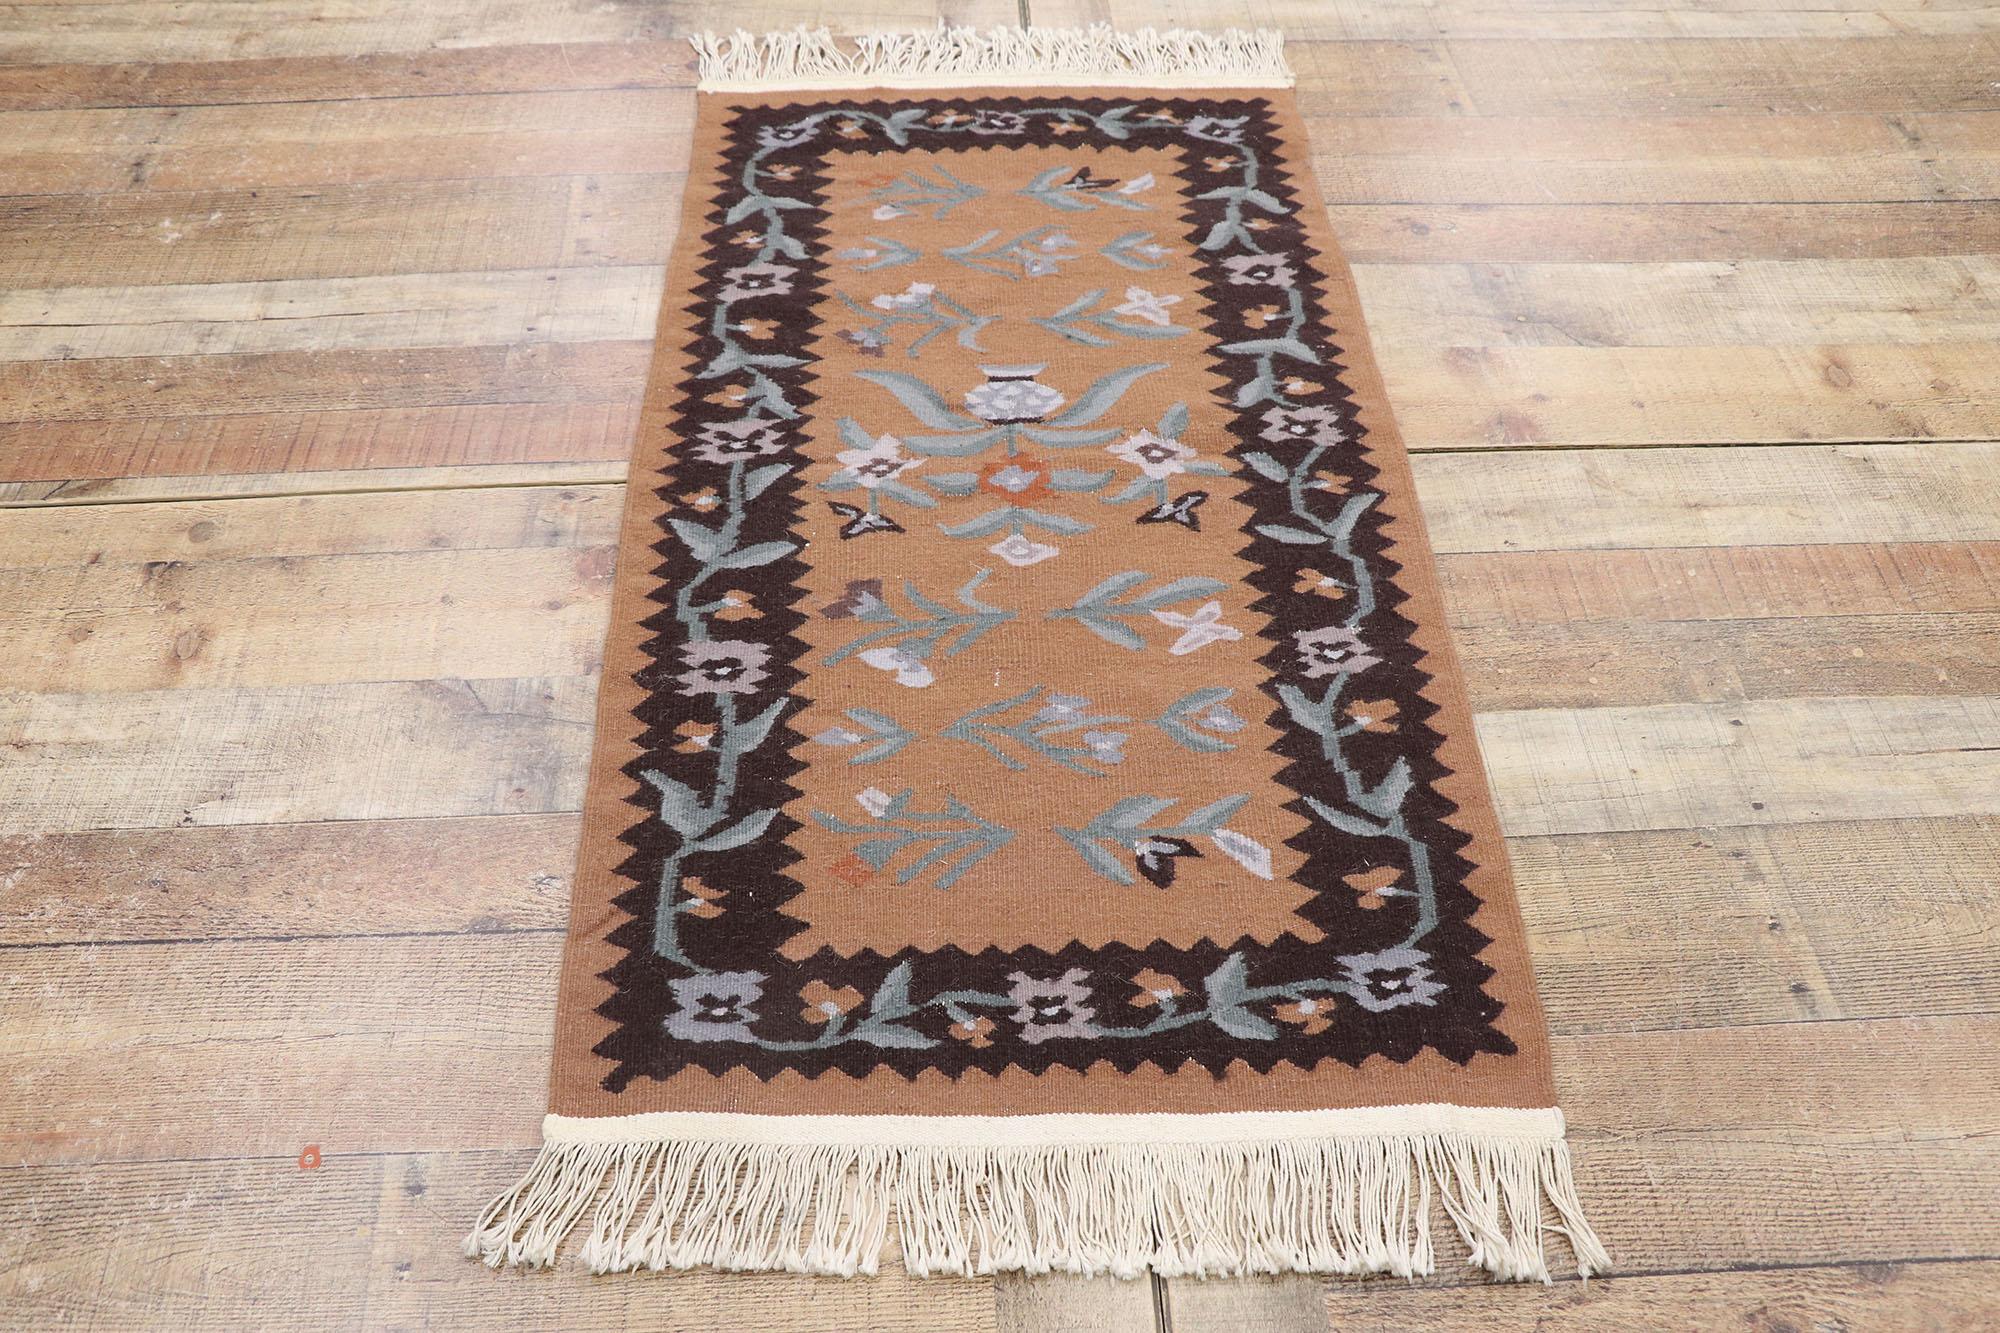 Vintage Persian Shiraz Kilim Rug with Rustic Farmhouse Style For Sale 1